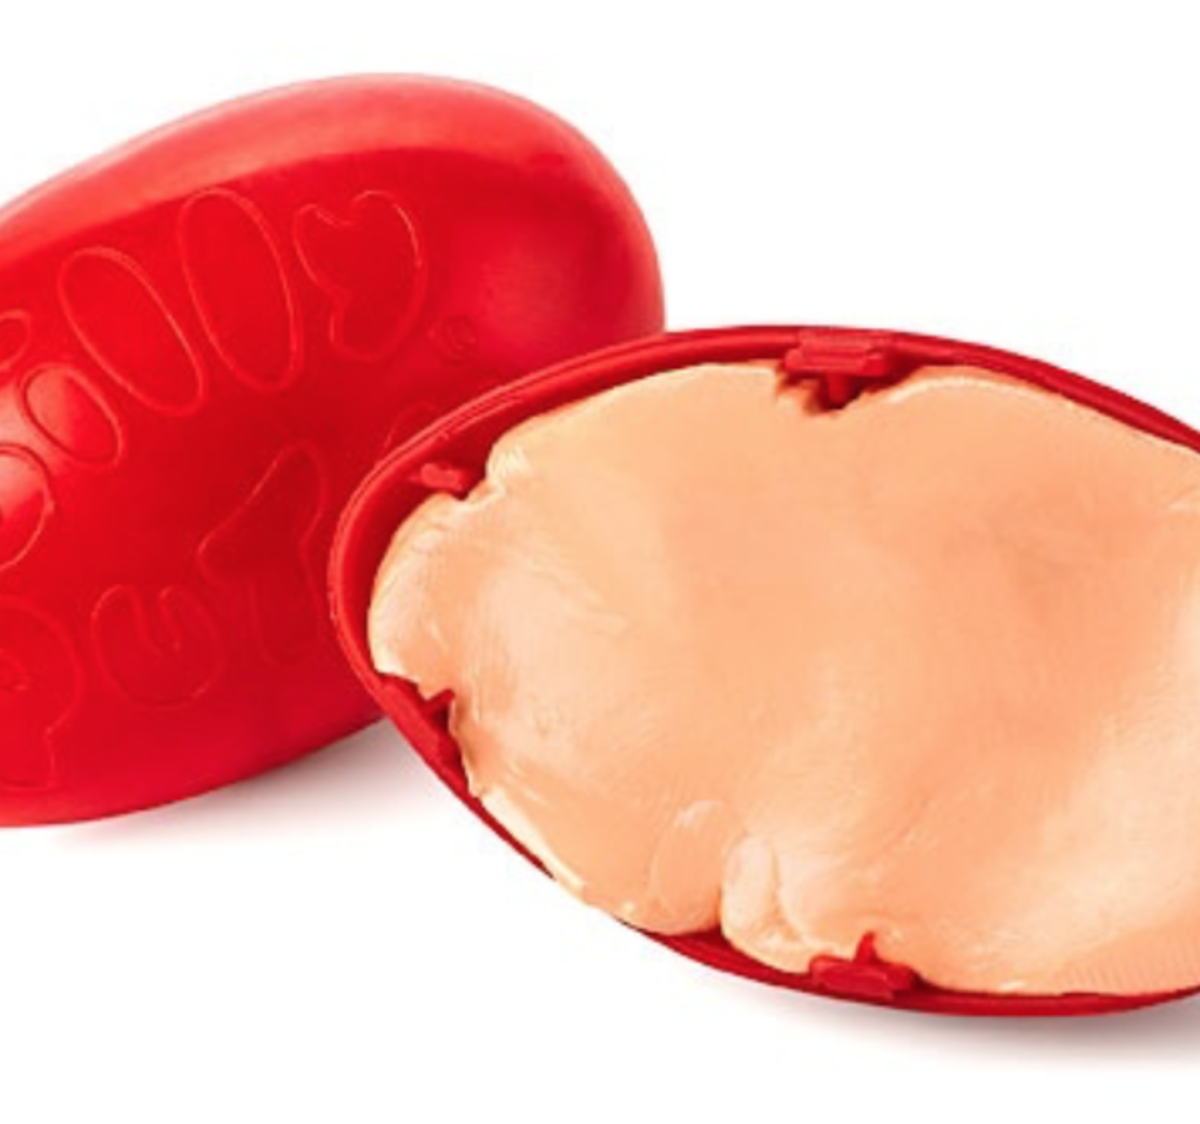  Toysmith Original Silly Putty Pack #104-48 6 Pack